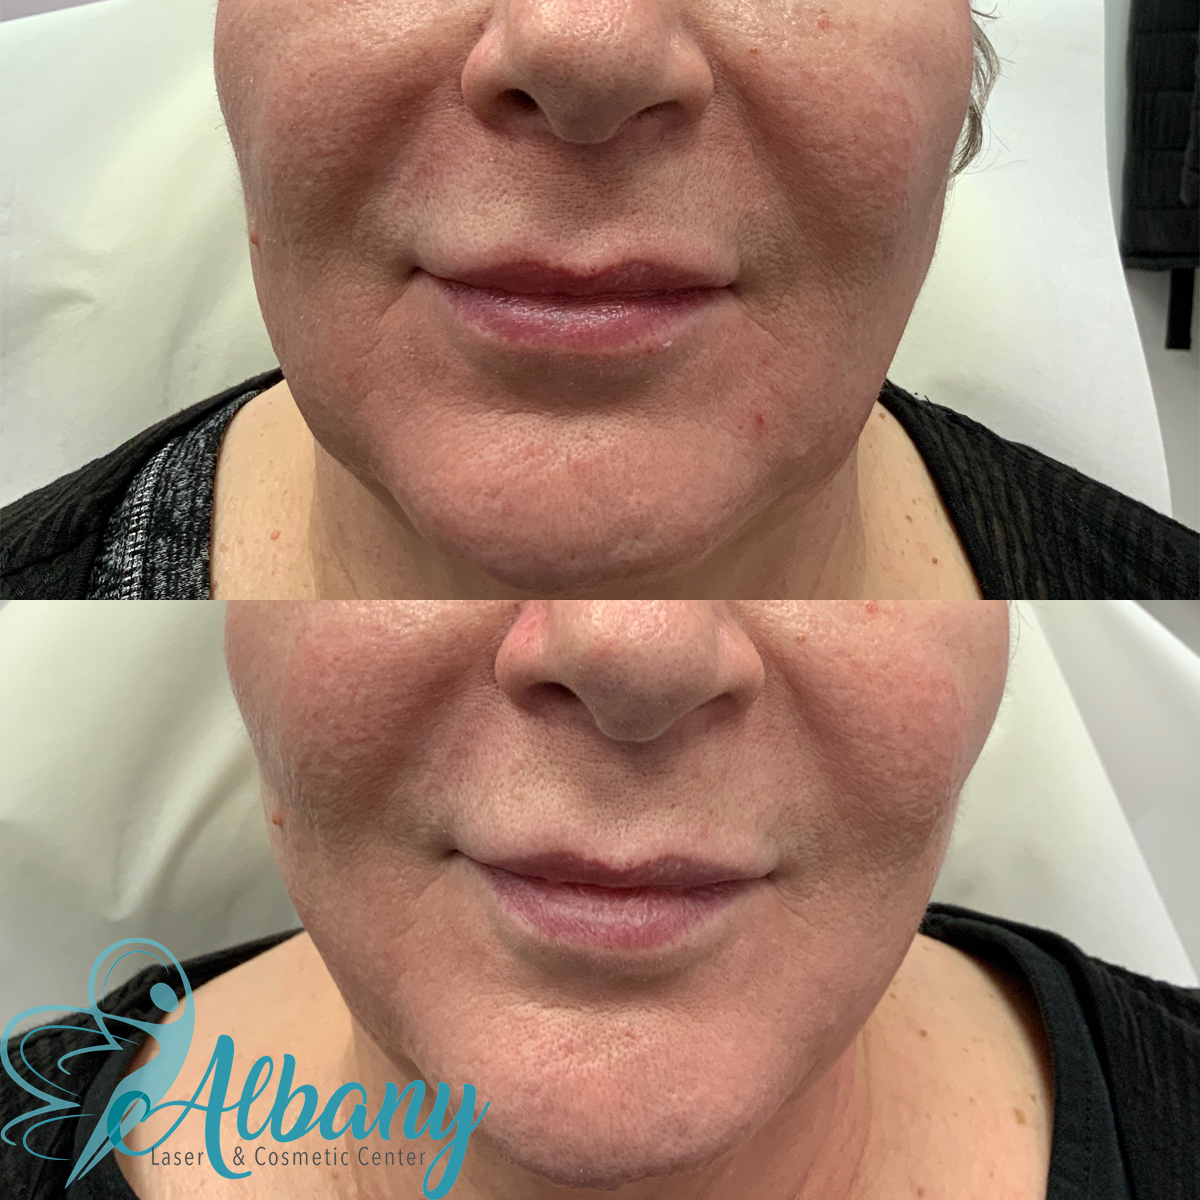 Before and after image of a woman's face showing a front view, illustrating smoother skin and diminished lines around the mouth following Bellafill fillers procedure at Albany Laser & Cosmetic Center.